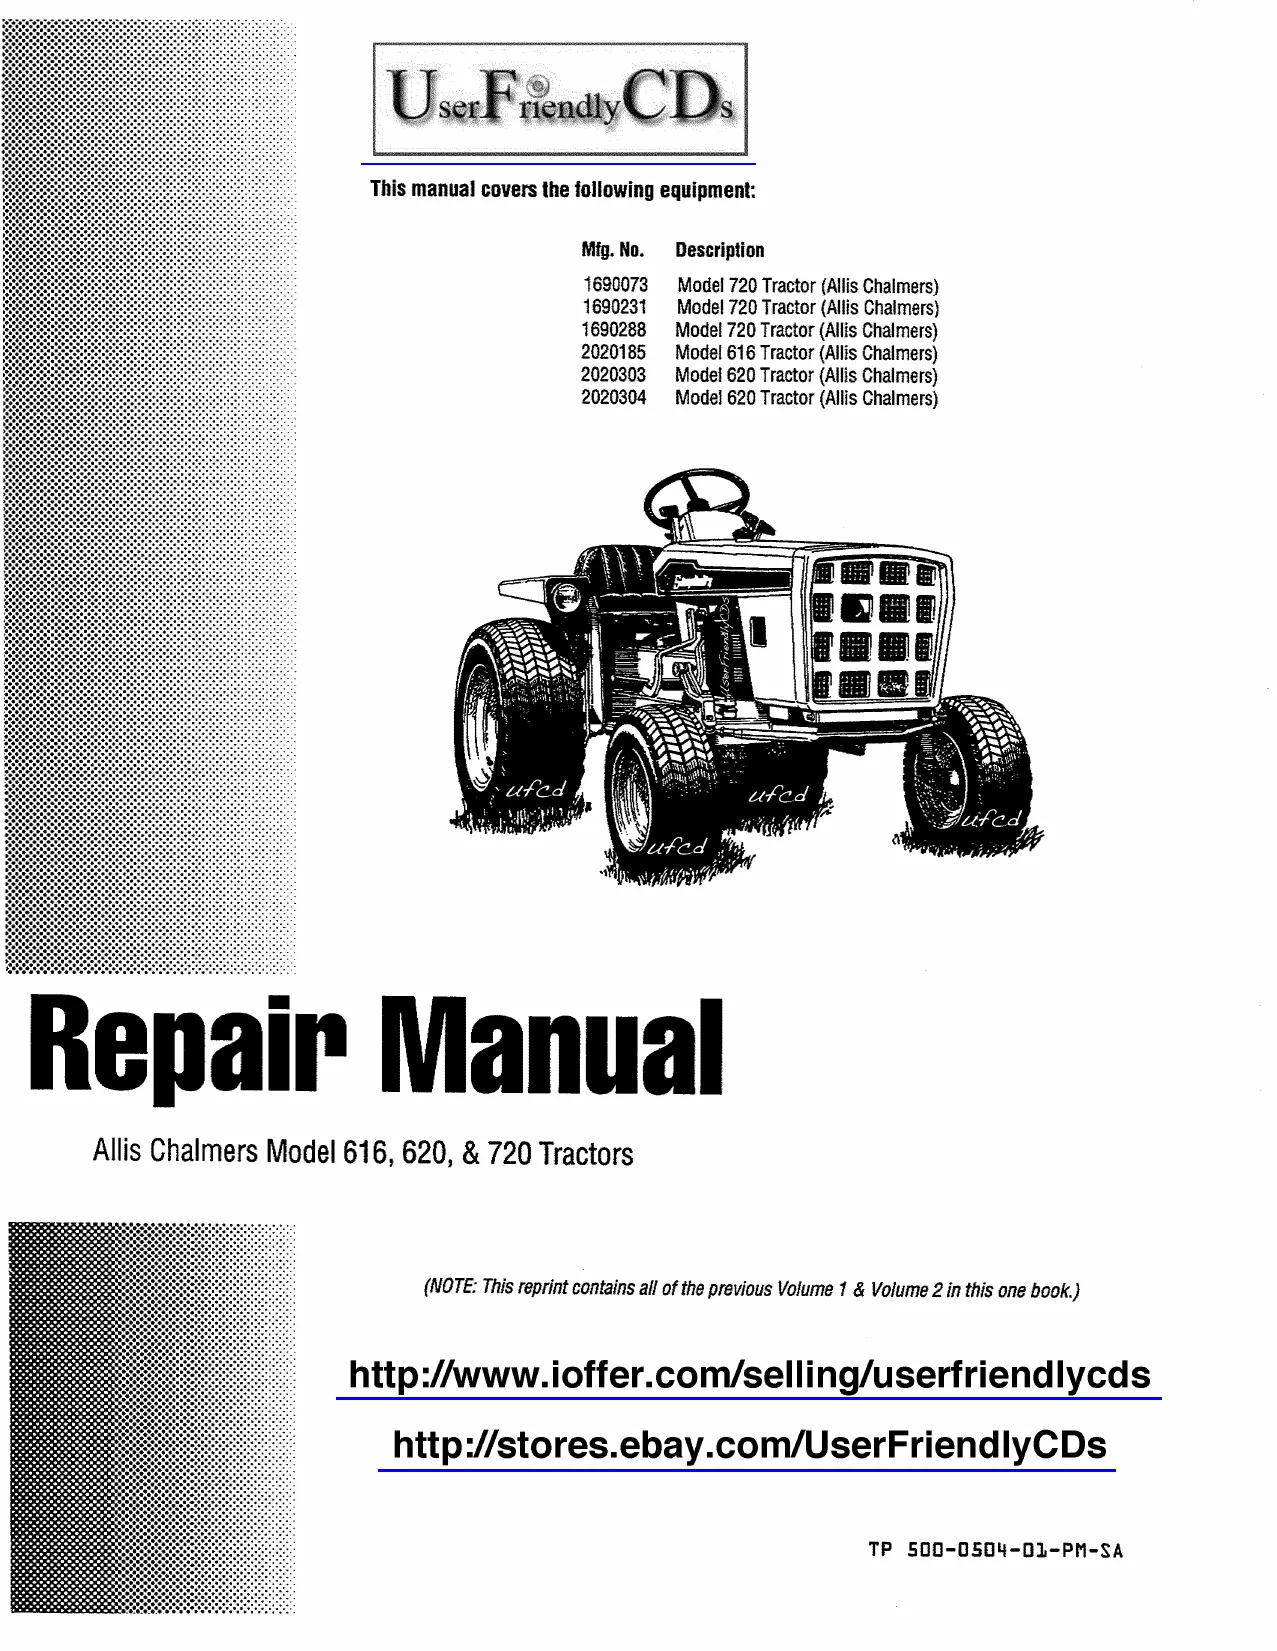 1975-1983 Allis Chalmers™ 720 tractor manual & parts list image